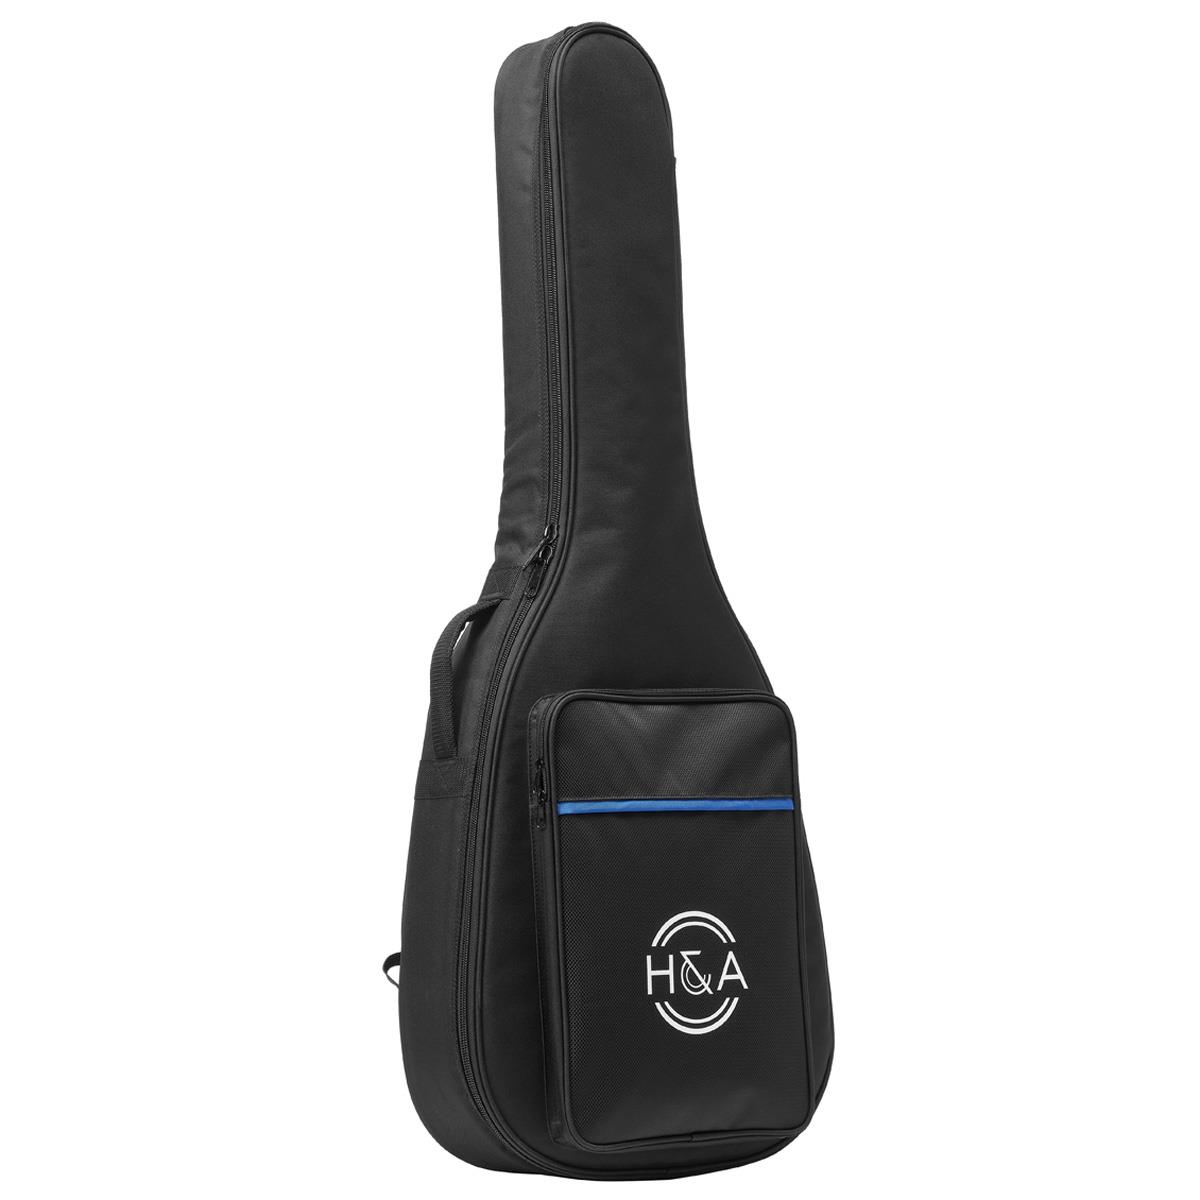 H&A Deluxe Gig Bag for Acoustic Guitars -  HAAGB2